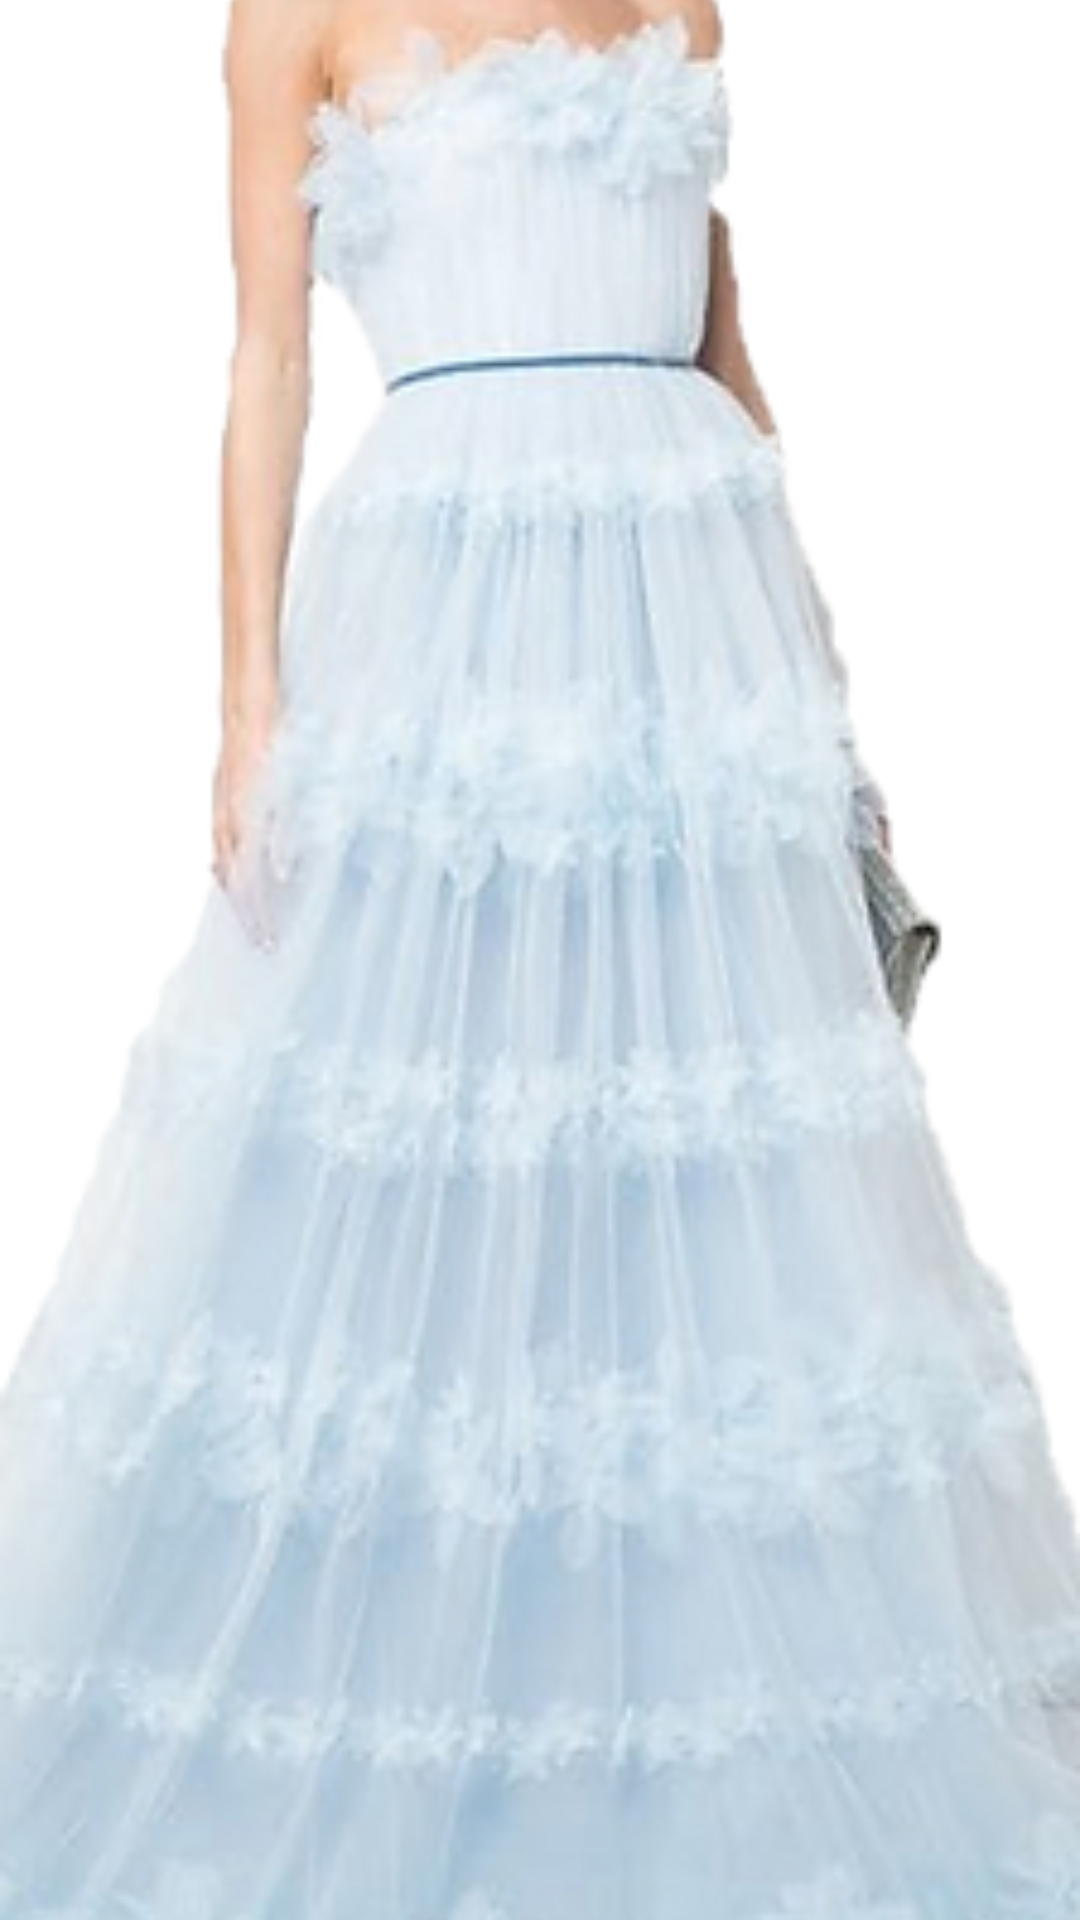 Marchesa Notte Thea Floral Applique A-Line Gown in Baby Blue